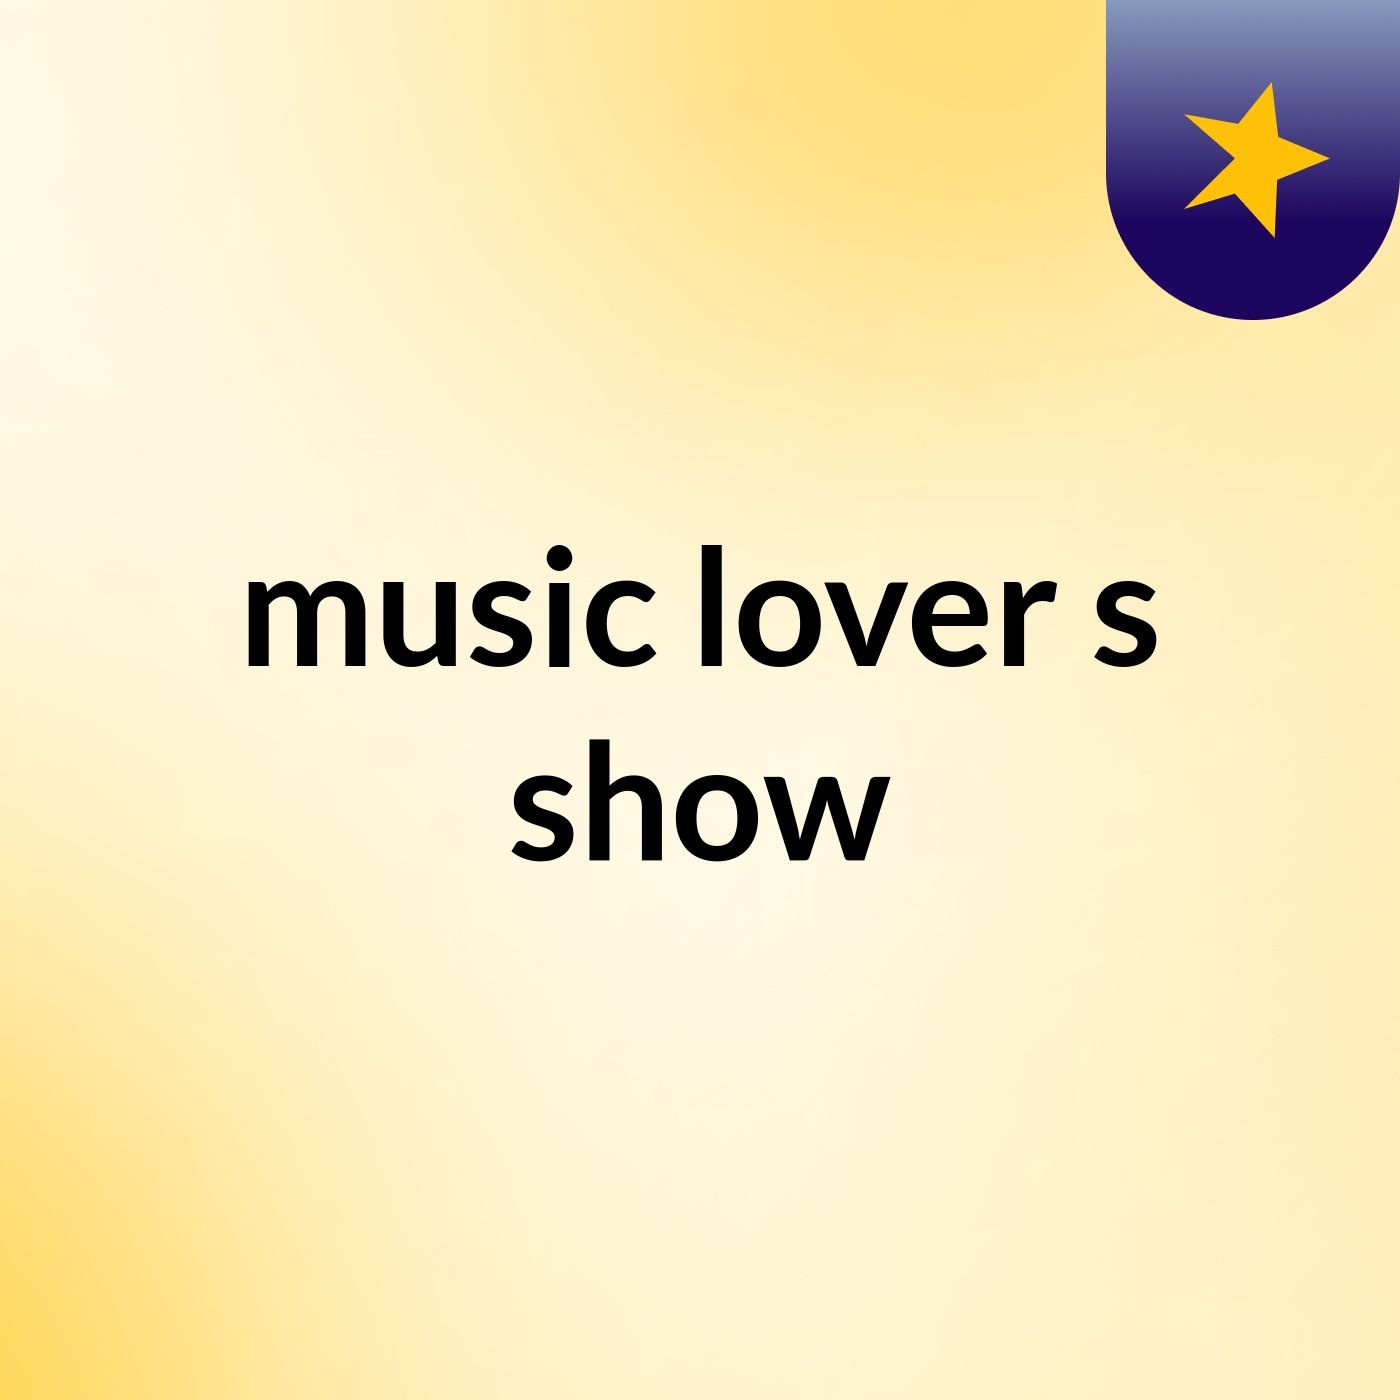 music lover's show